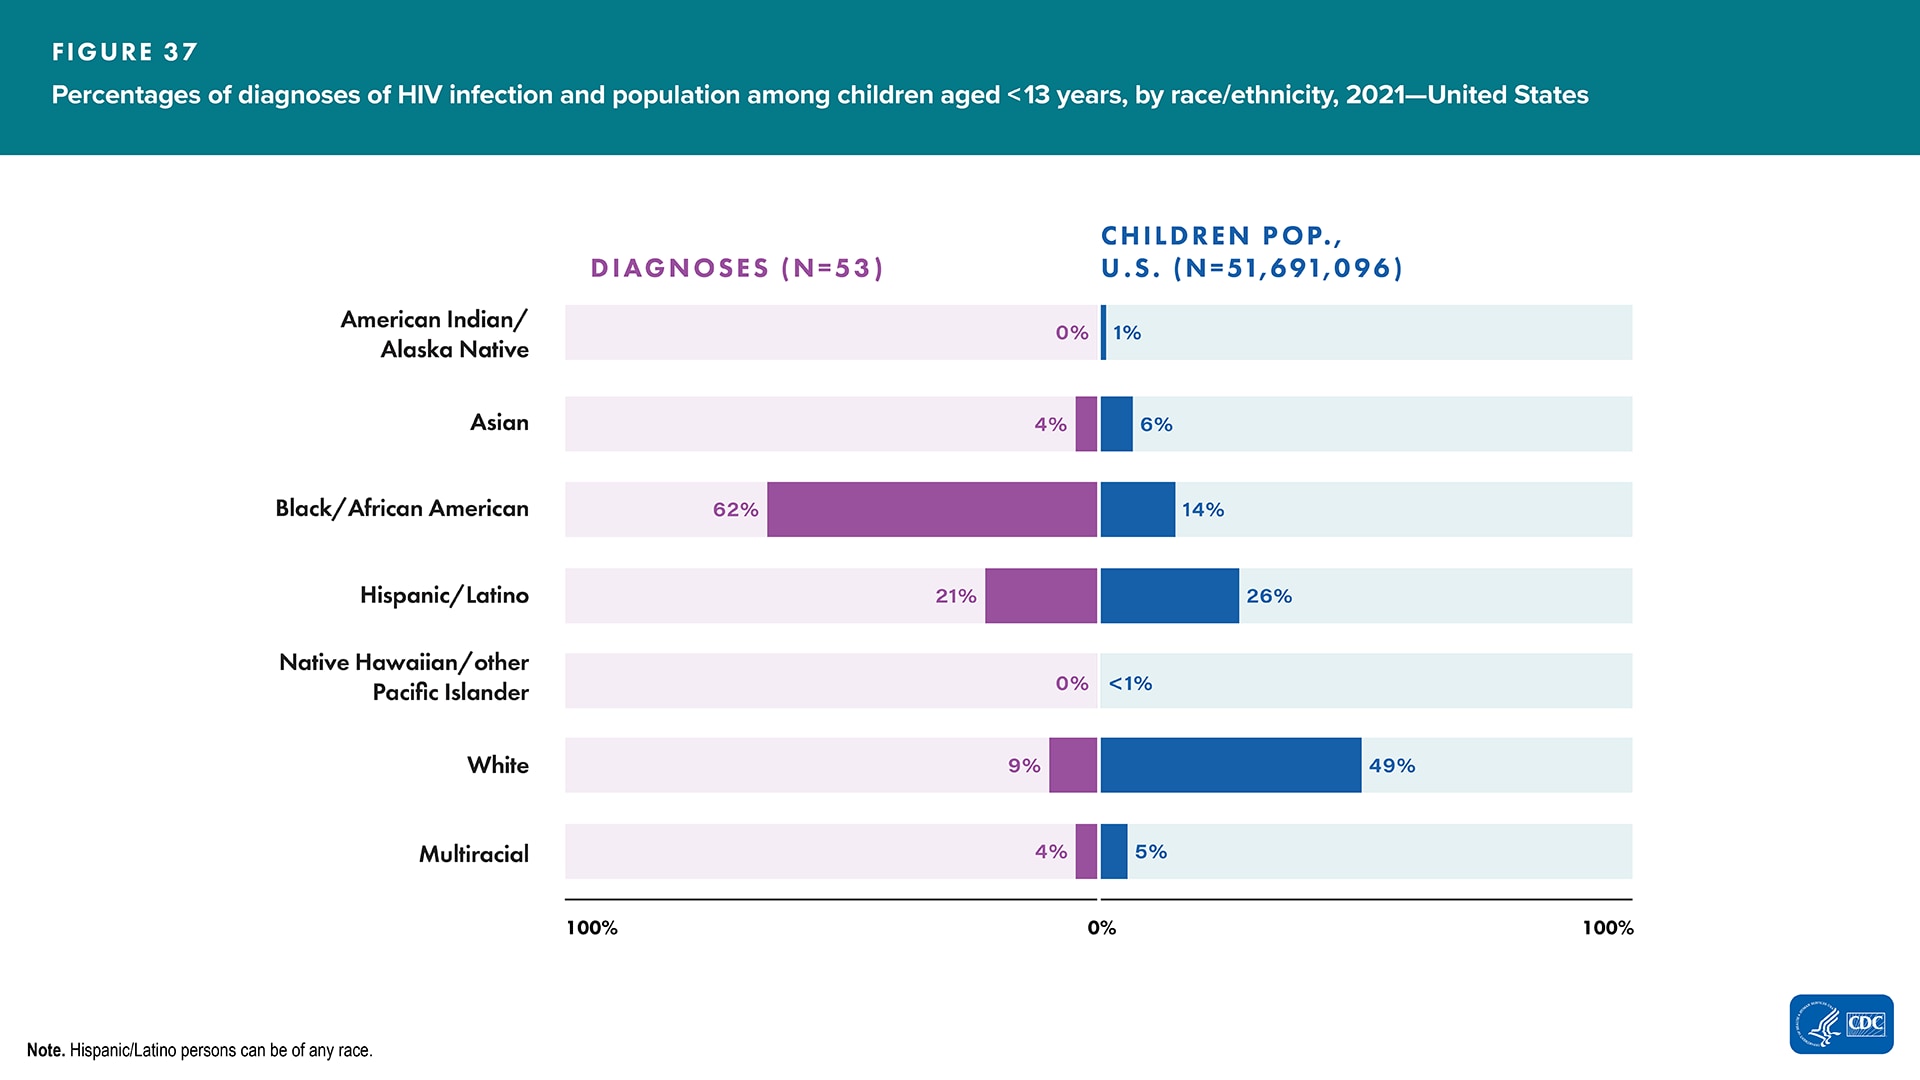 In 2021, among children in the United States, Black/African American children made up approximately 14% of the population of children but accounted for 62% of diagnoses of HIV infection. Hispanic/Latino children made up 26% of the population of children, but HIV infection among this group accounted for 21% of diagnoses. White children made up 49% of the population of children, but HIV infection among this group accounted for 9% of diagnoses.